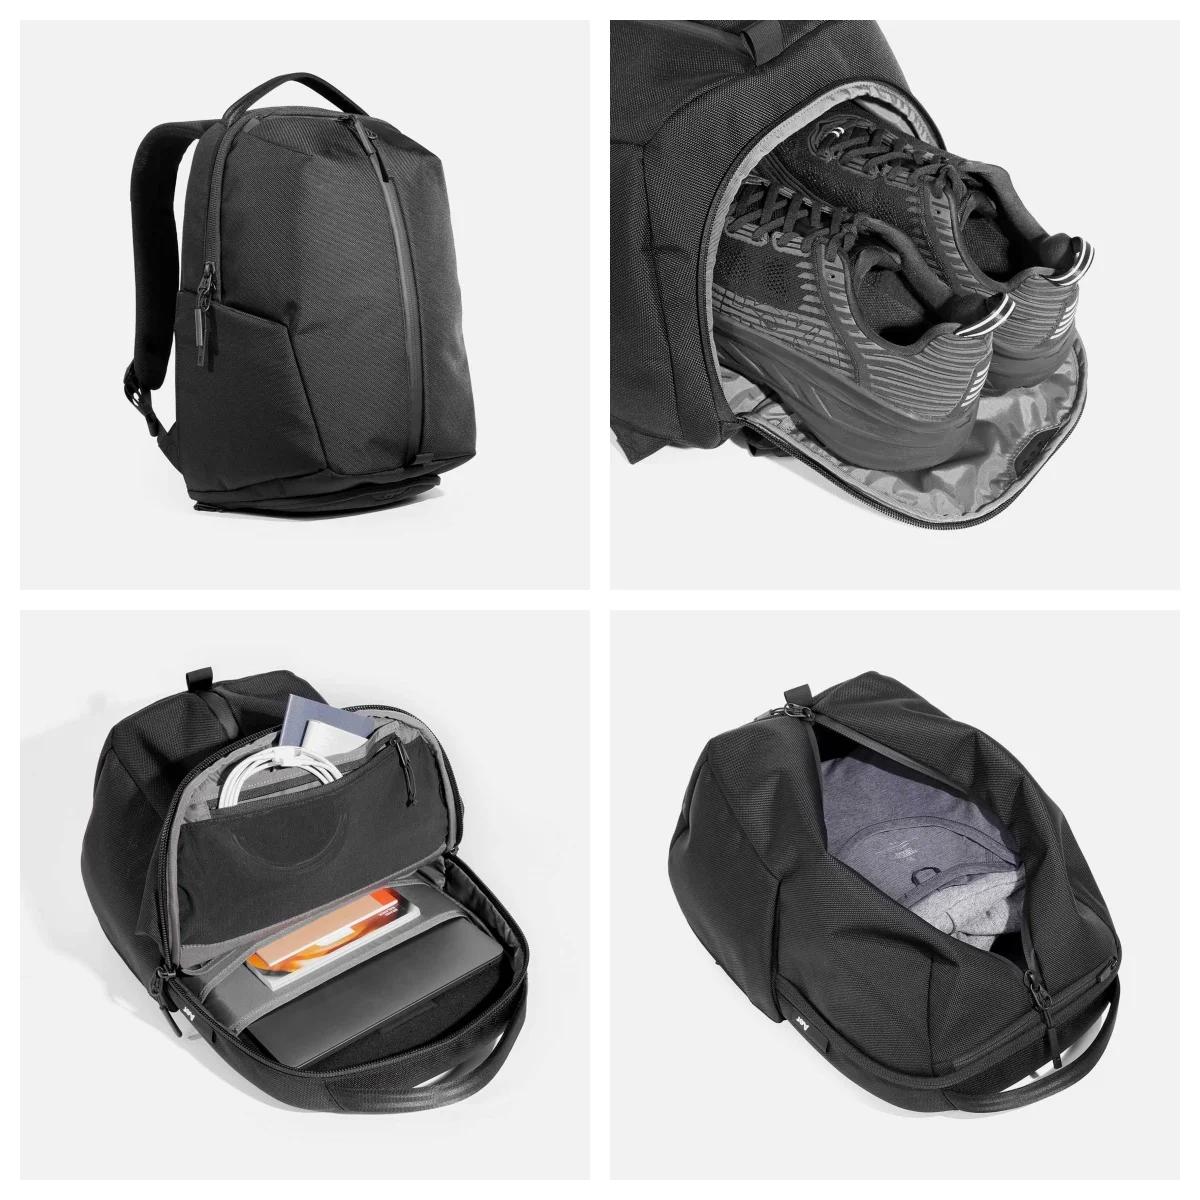 

Aer Fit Pack 3 Black - Compact Gym/Work EDC Backpack, Ventilated Shoe Compartment, Fits 16” Laptop, Water Bottle Pockets BNWT